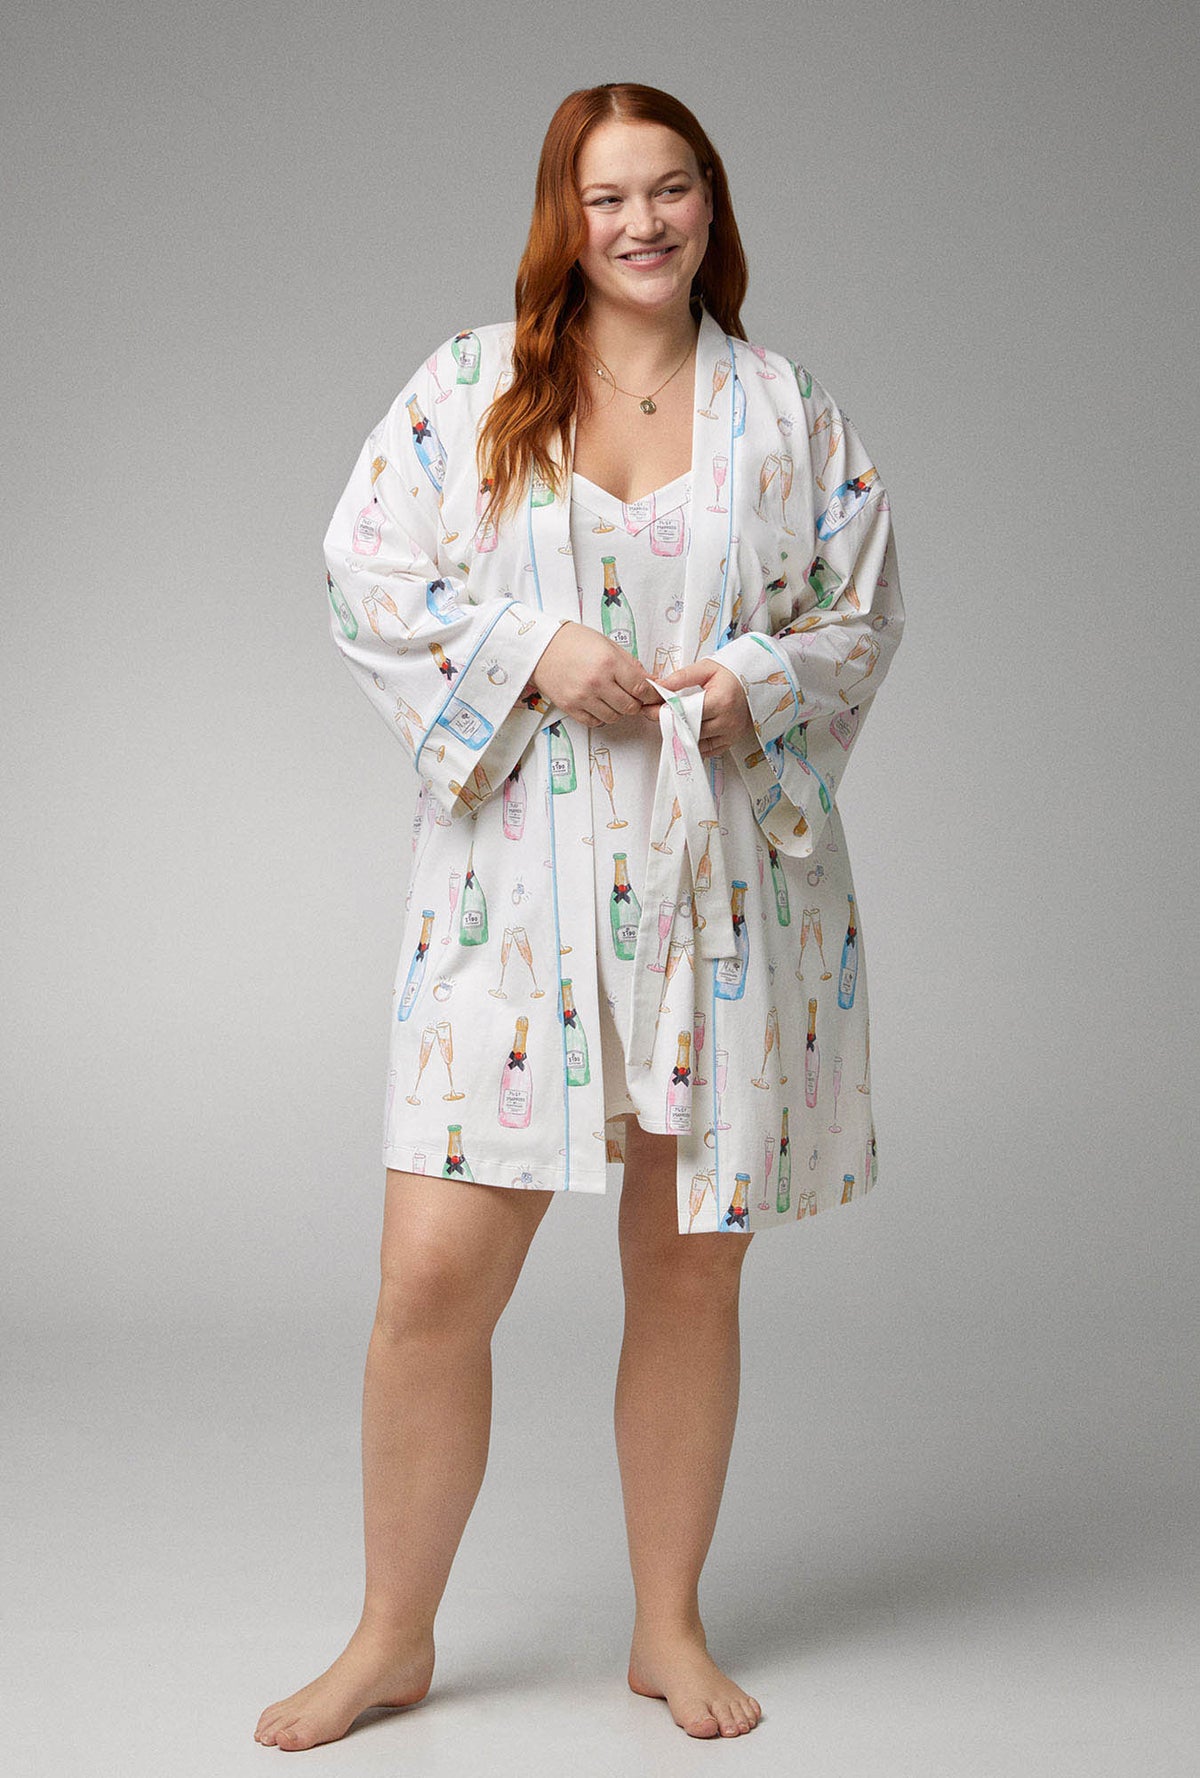 A lady wearing white Banded Collar Stretch Jersey Robe with Champagne Wedding print